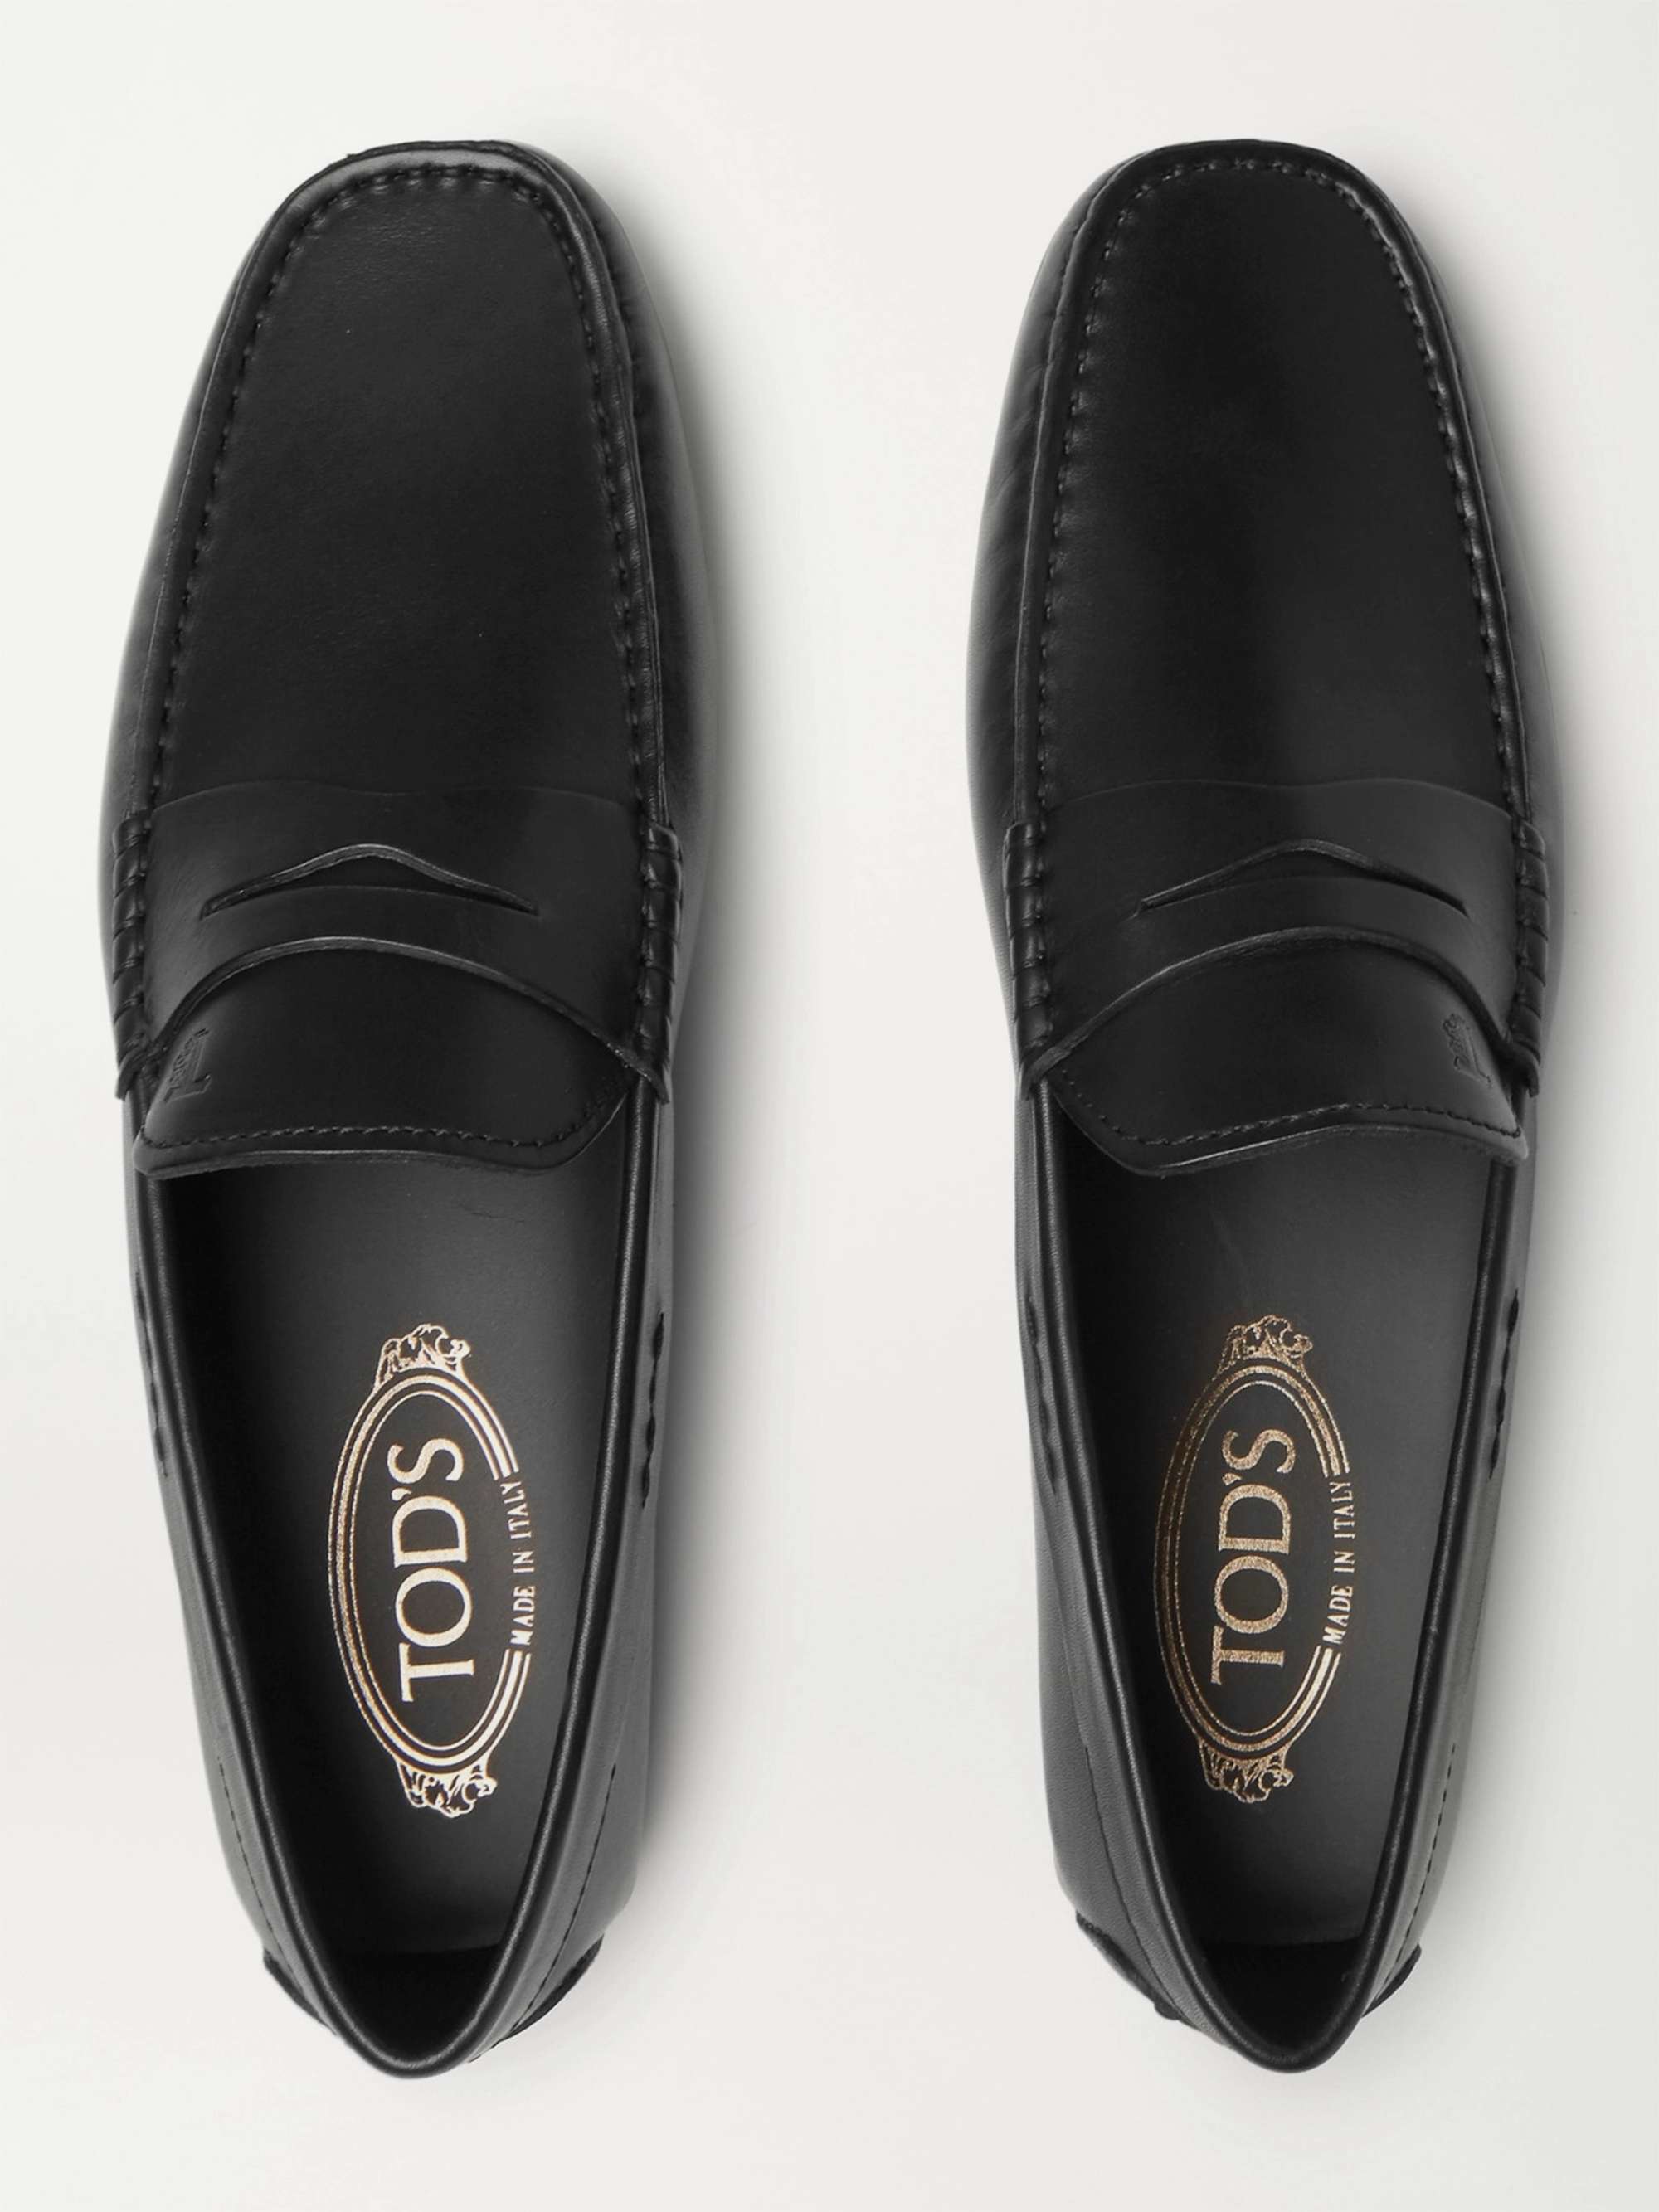 TOD'S City Gommino Leather Penny Loafers for Men | MR PORTER